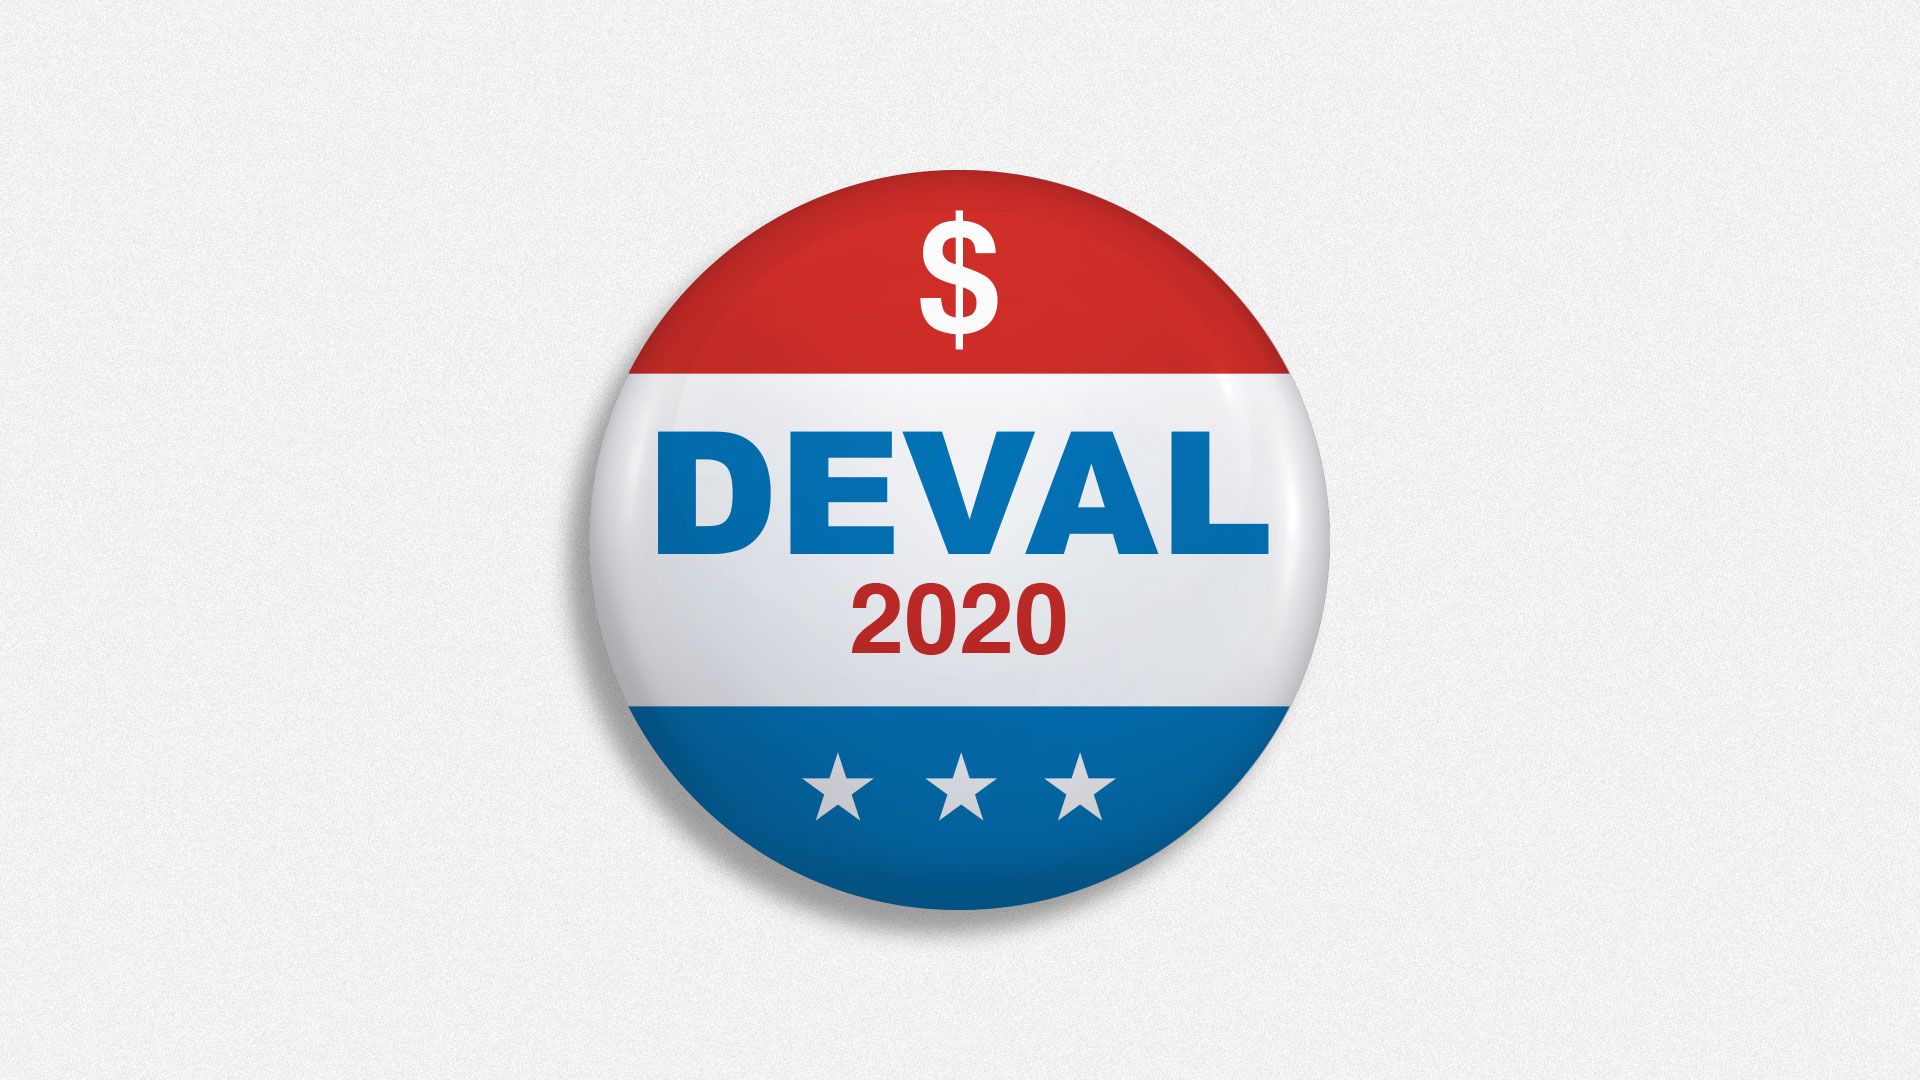 Illustration of Deval 2020 campaign button with dollar sign and stars.